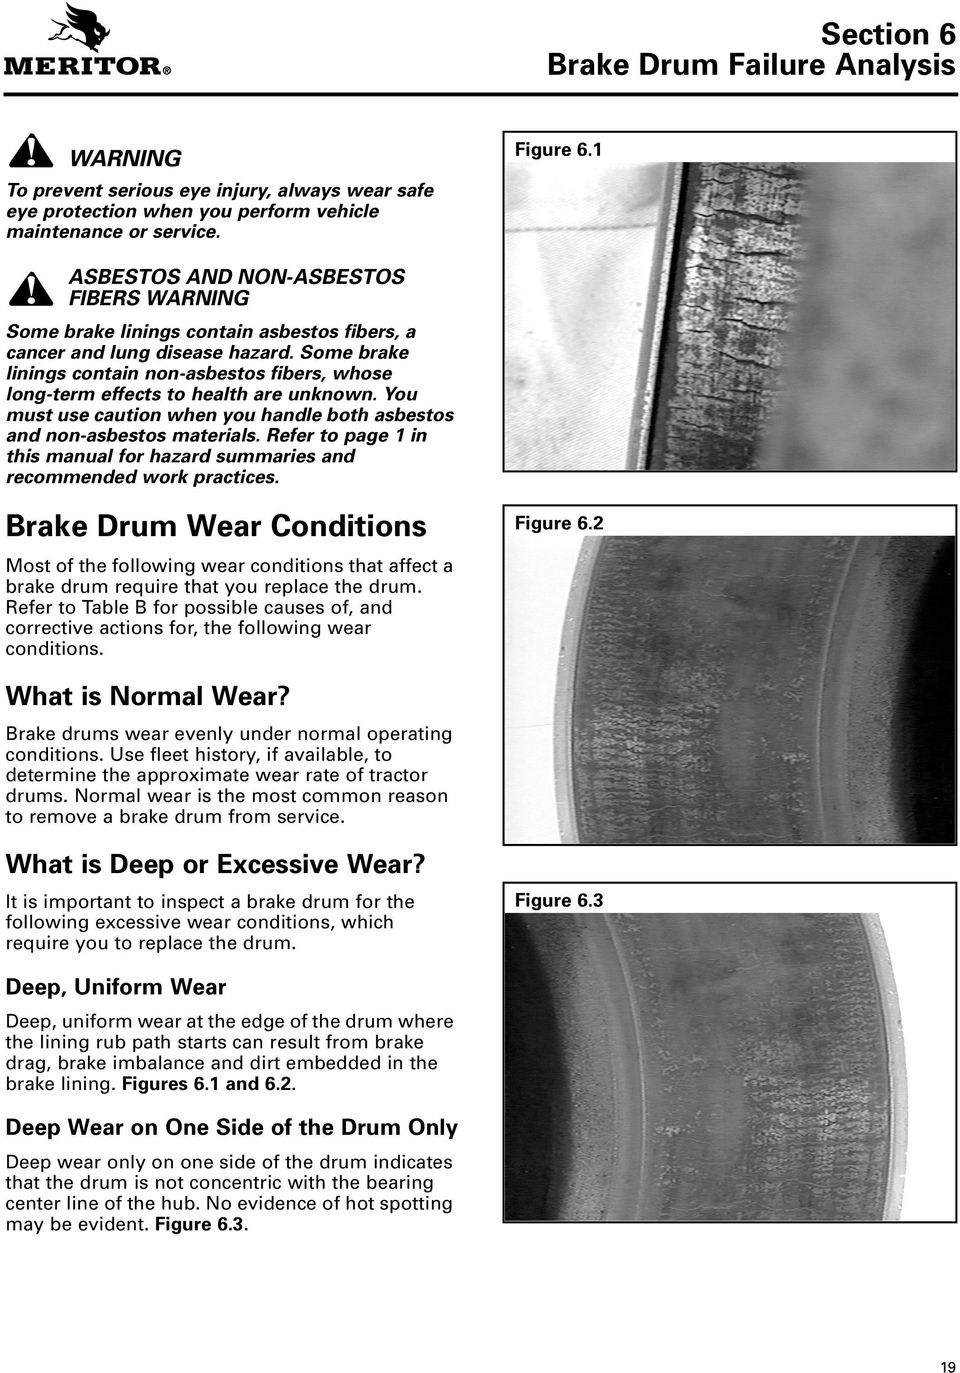 Some brake linings contain non-asbestos fibers, whose long-term effects to health are unknown. You must use caution when you handle both asbestos and non-asbestos materials.